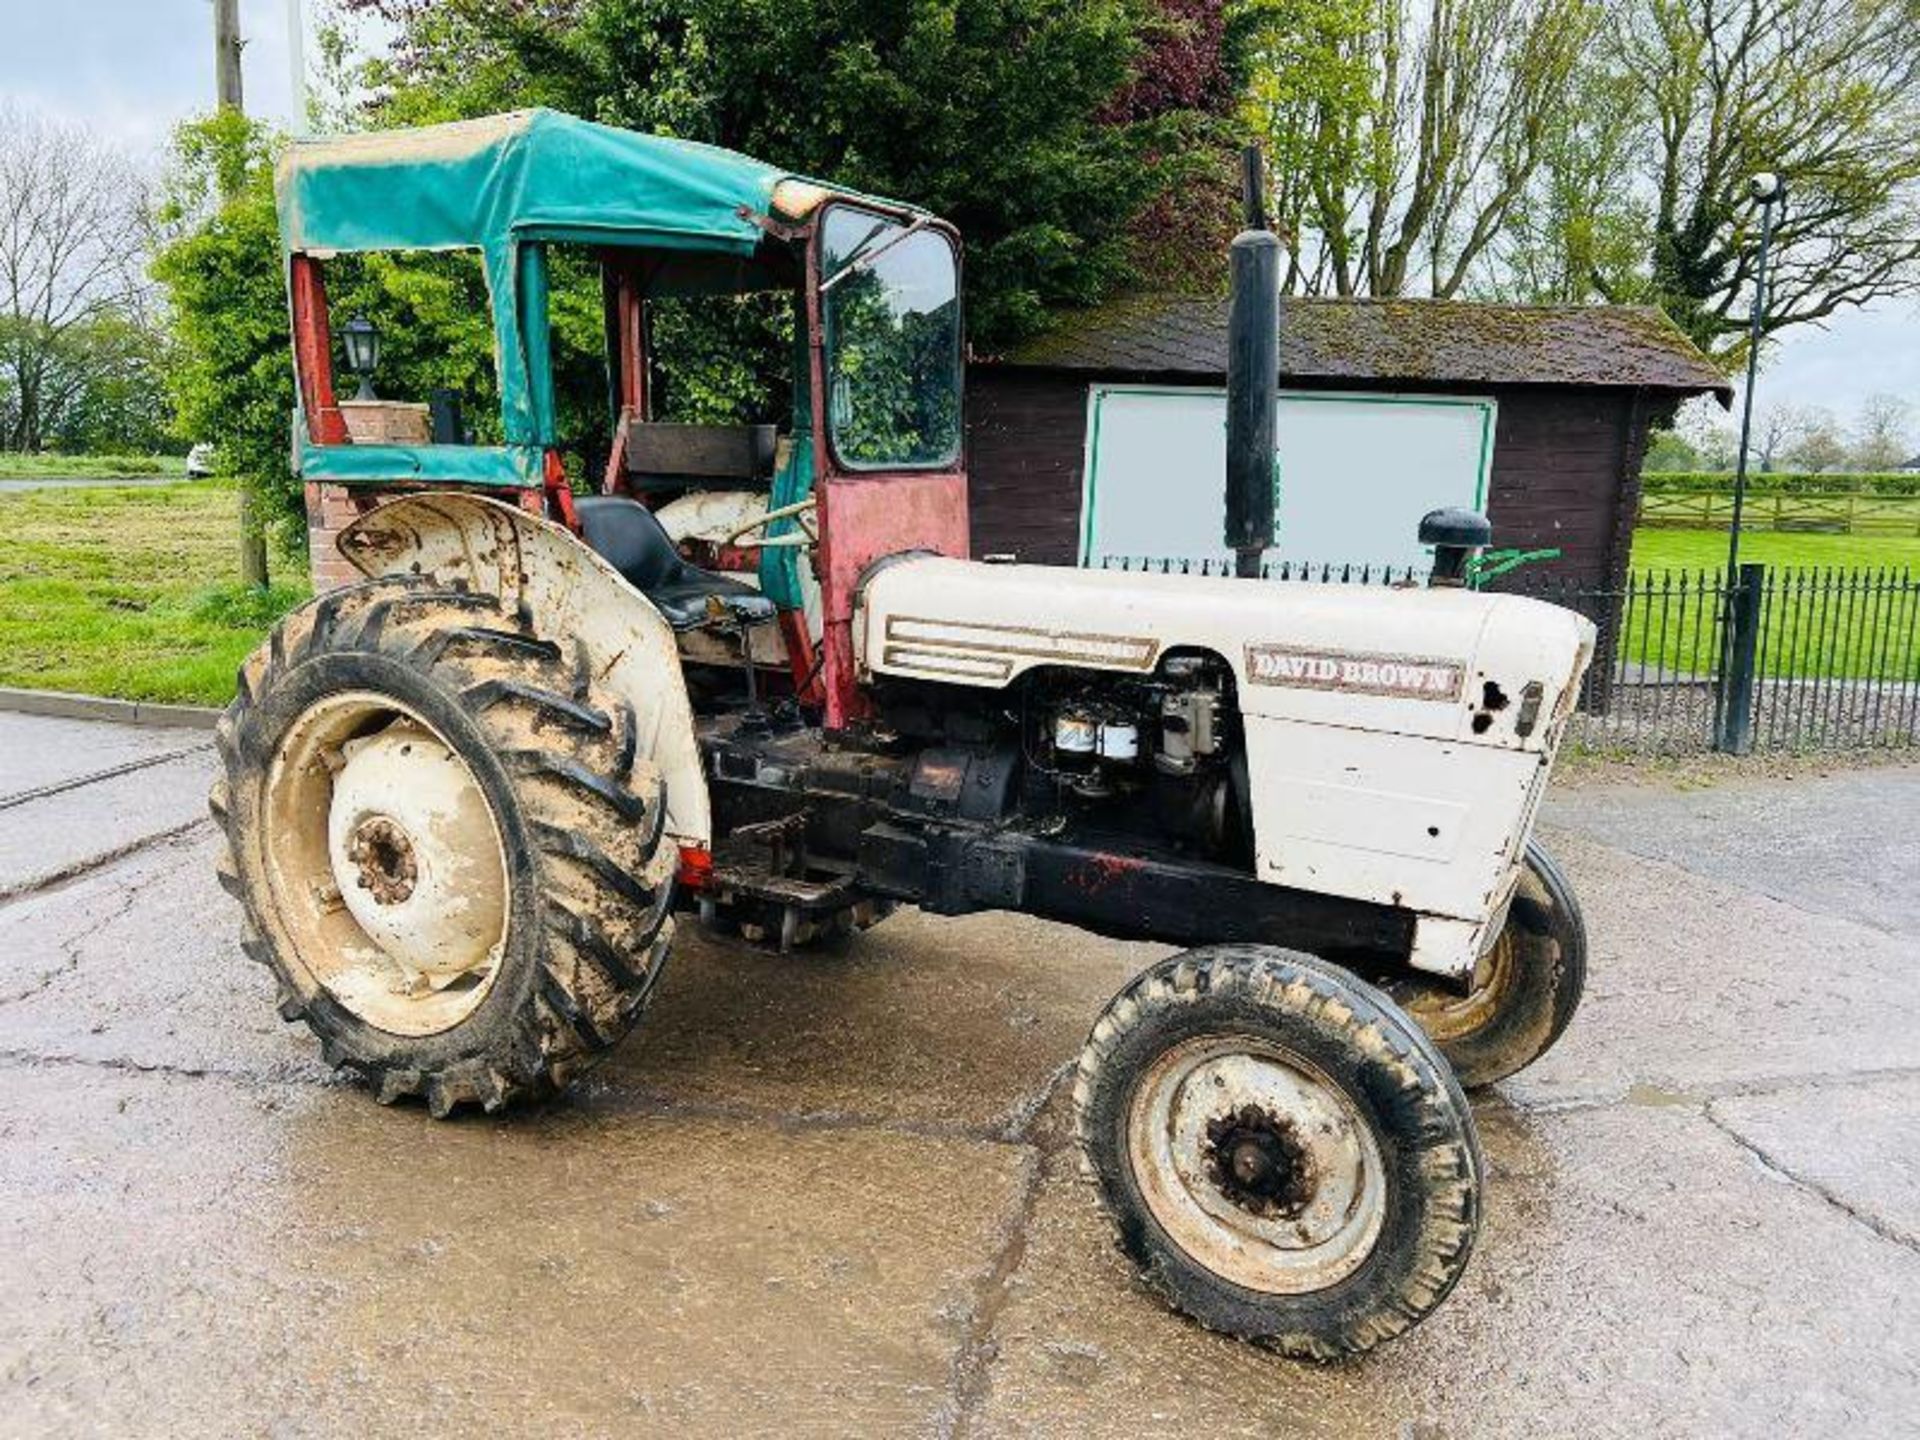 DAVID BROWN 780 TRACTOR *ONE OWNER FROM NEW* C/W ORIGINAL HANDBOOK FROM NEW - Image 2 of 13